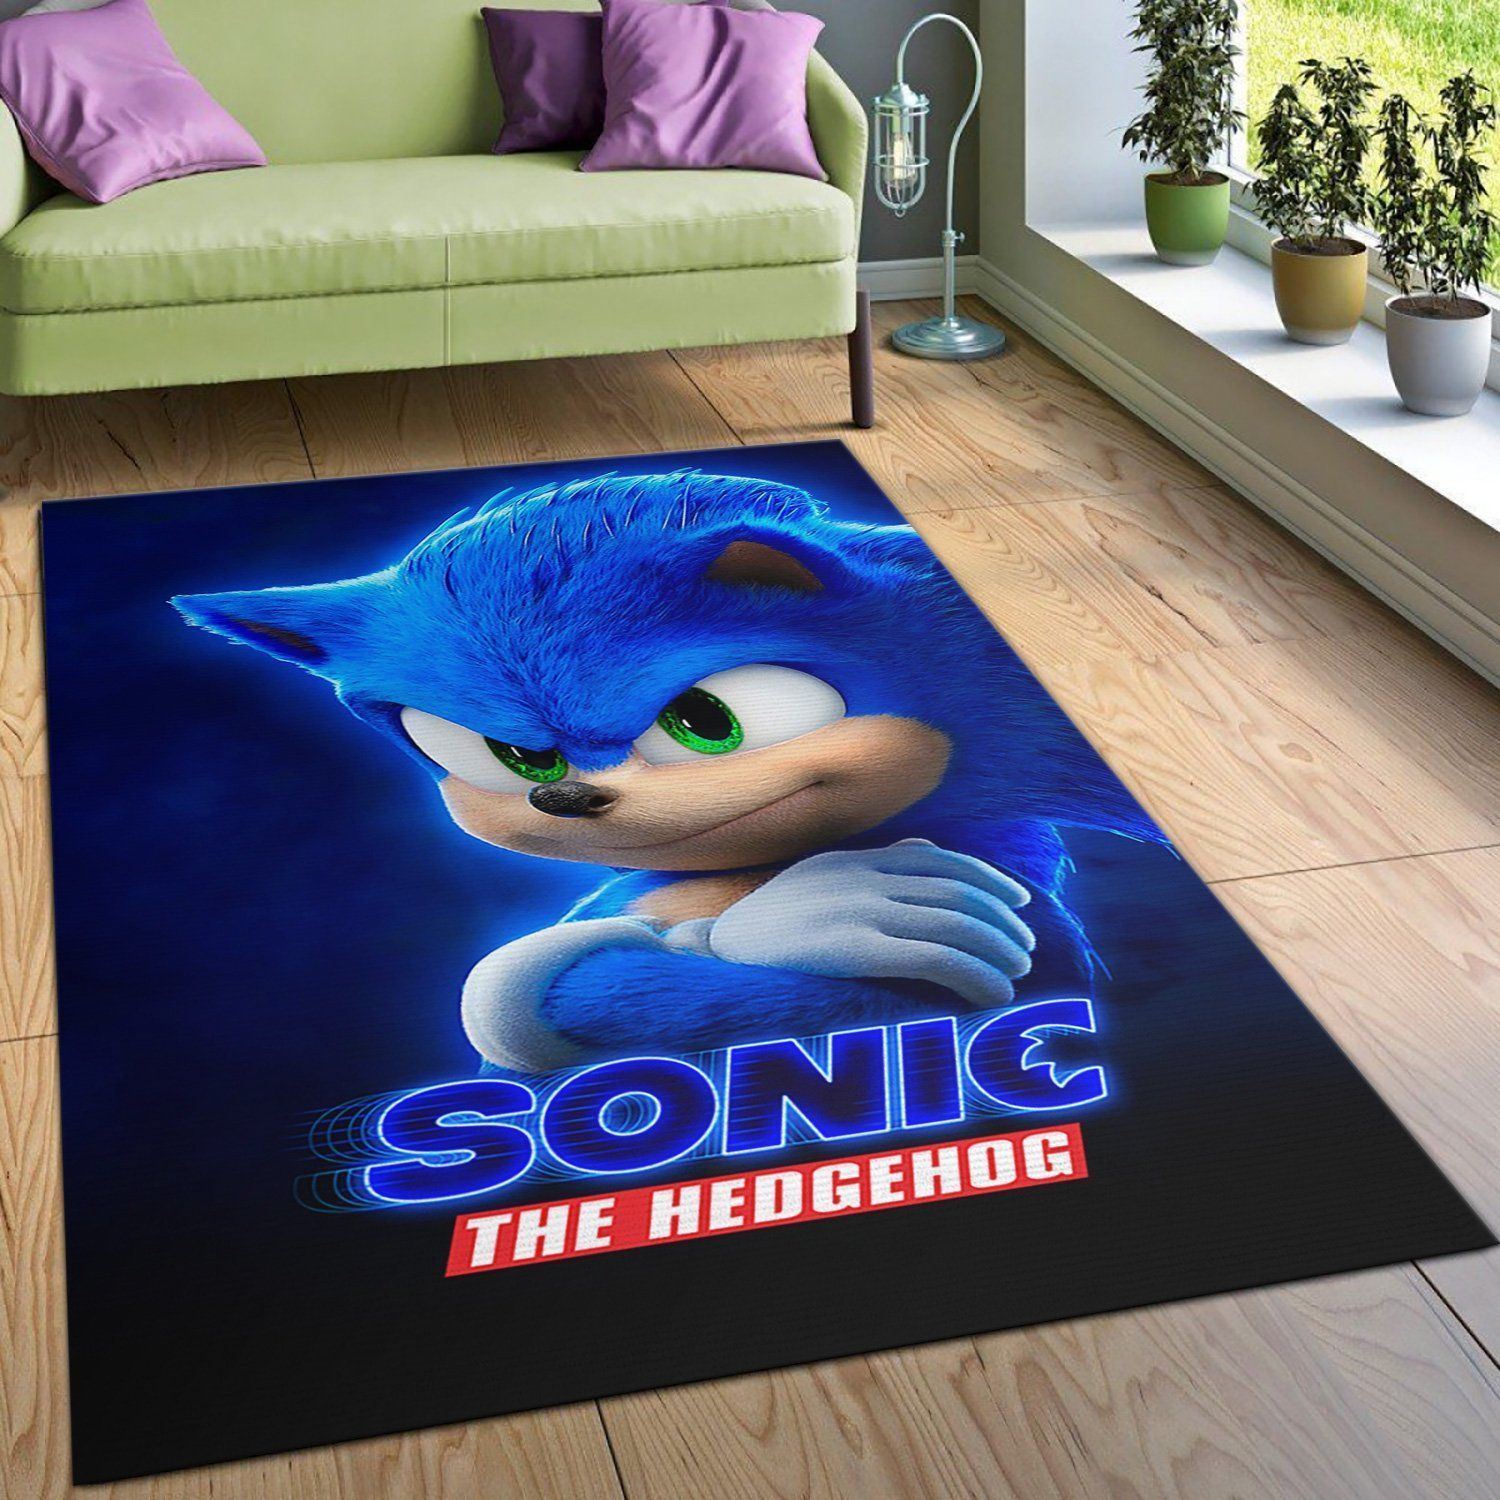 Sonic The Hedgehog Modeling Area Rug For Christmas, Living Room Rug, Home Decor - Indoor Outdoor Rugs 2